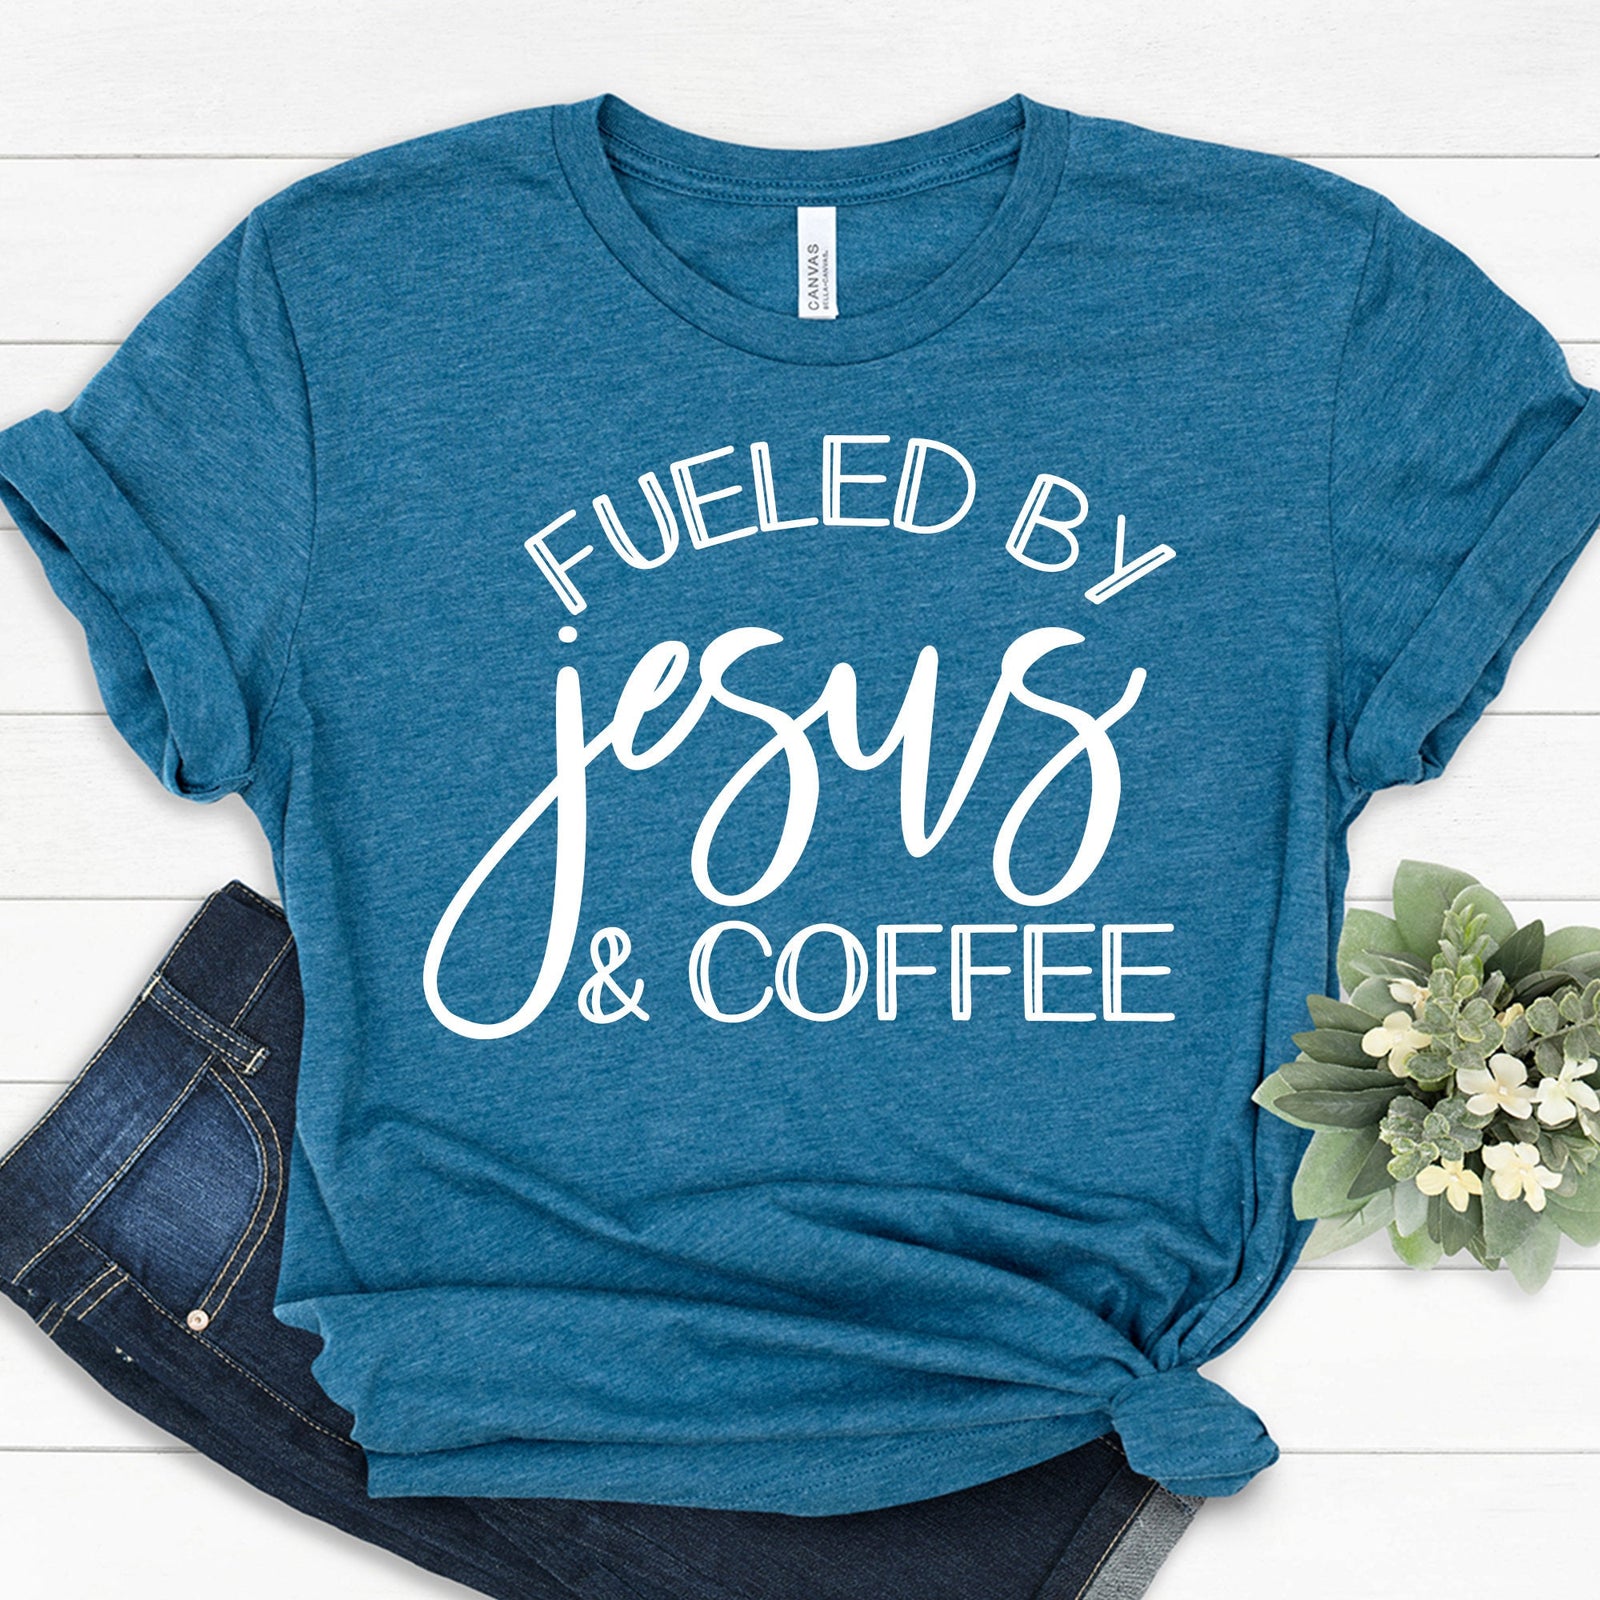 Fueled By Jesus and Coffee T Shirt - Christian Shirt- Jesus T Shirt - Blessed T Shirt